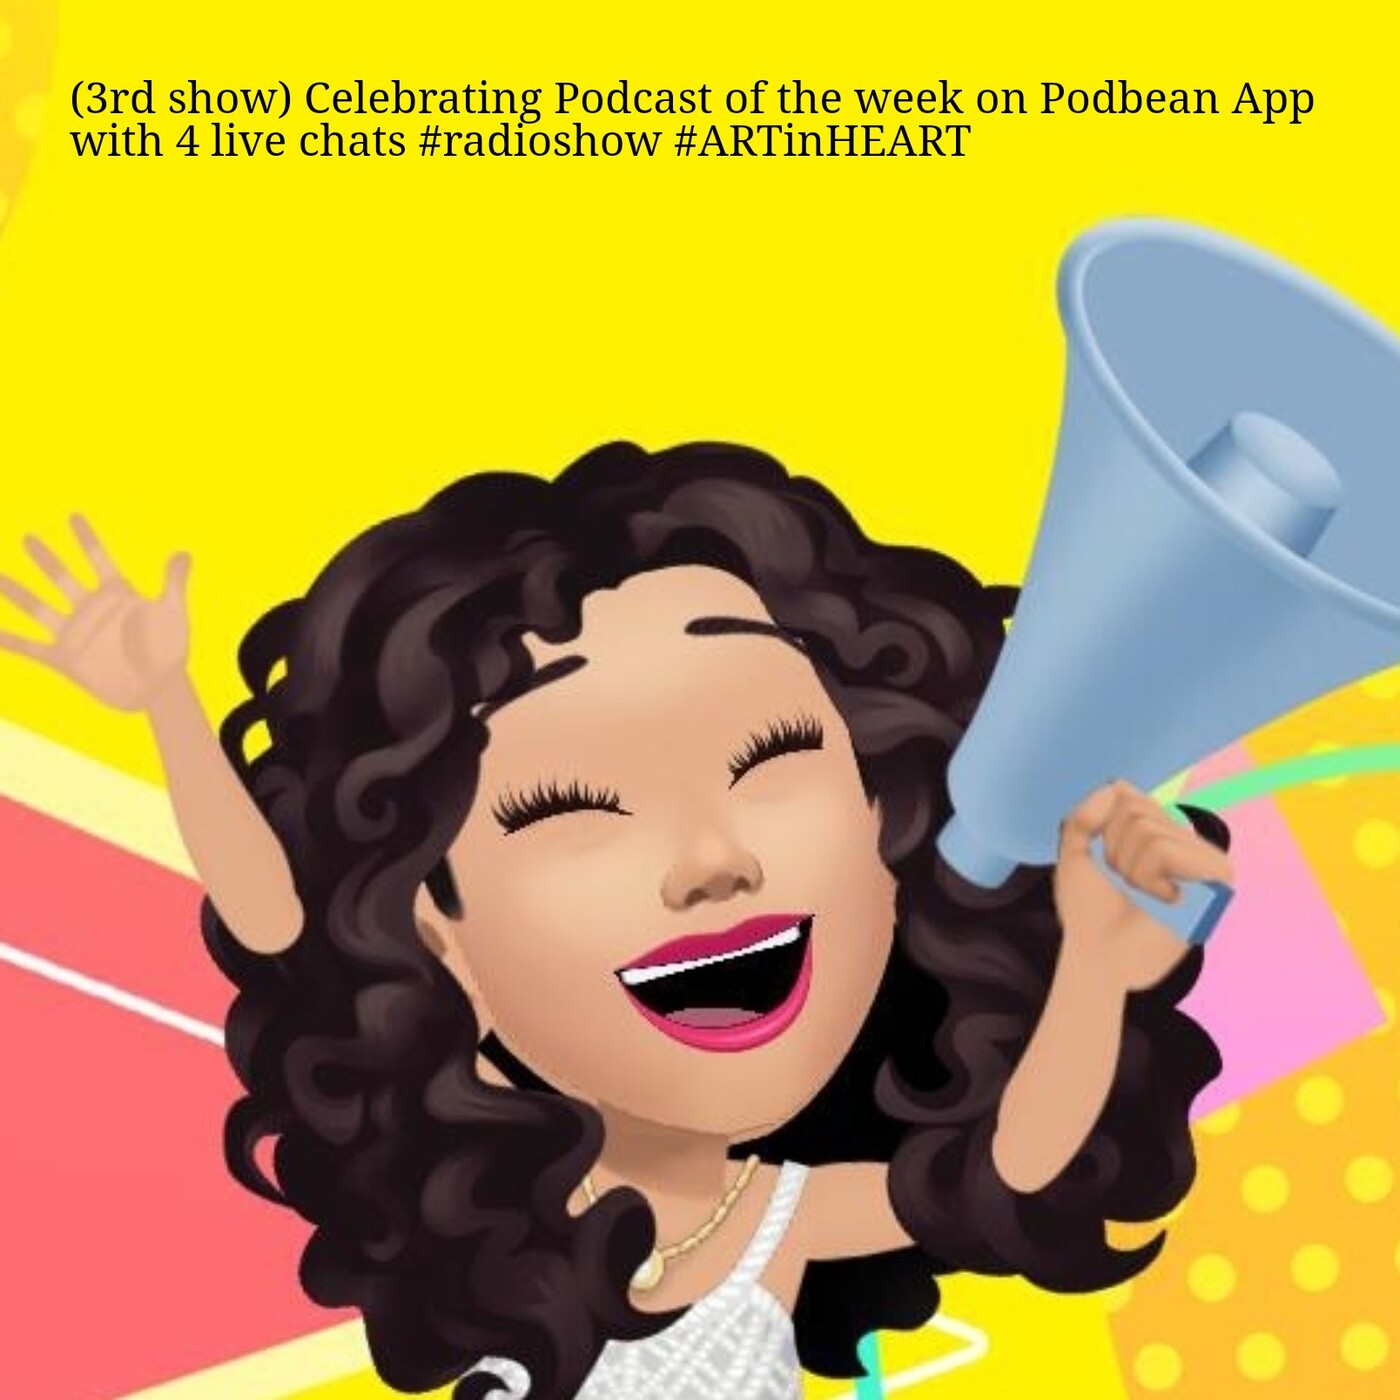 (3rd show) Celebrating Podcast of the week on Podbean App with 4 live chats #radioshow #ARTinHEART